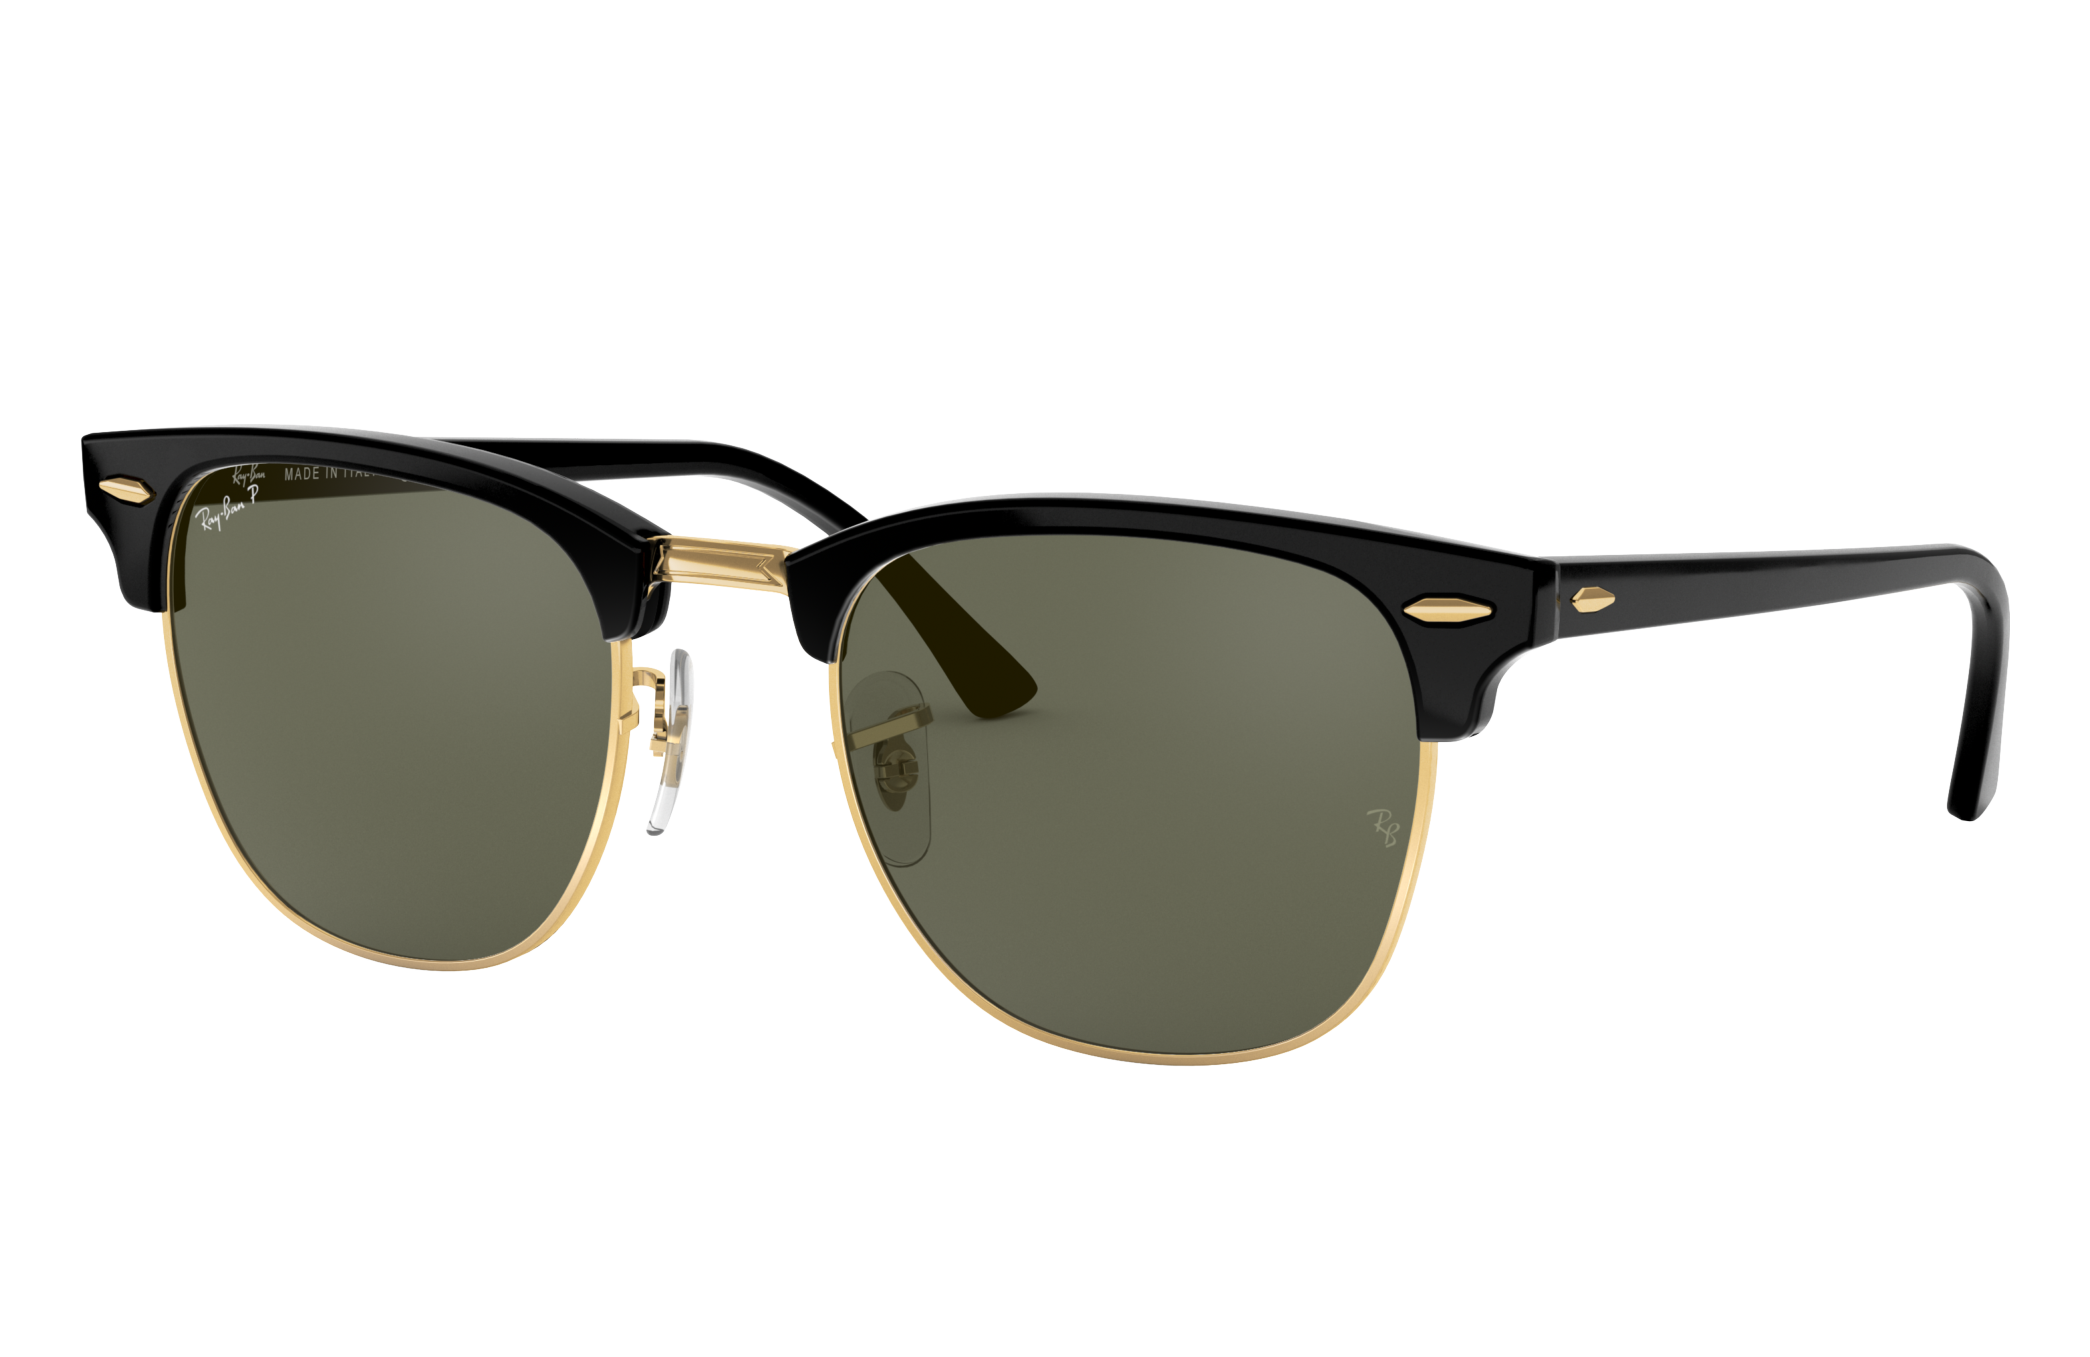 Ray Ban Clubmaster Classic Low Bridge Fit Rb3016f Asian Fit Black Acetate Green Polarized Lenses 0rb3016f901 5855 Ray Ban Usa